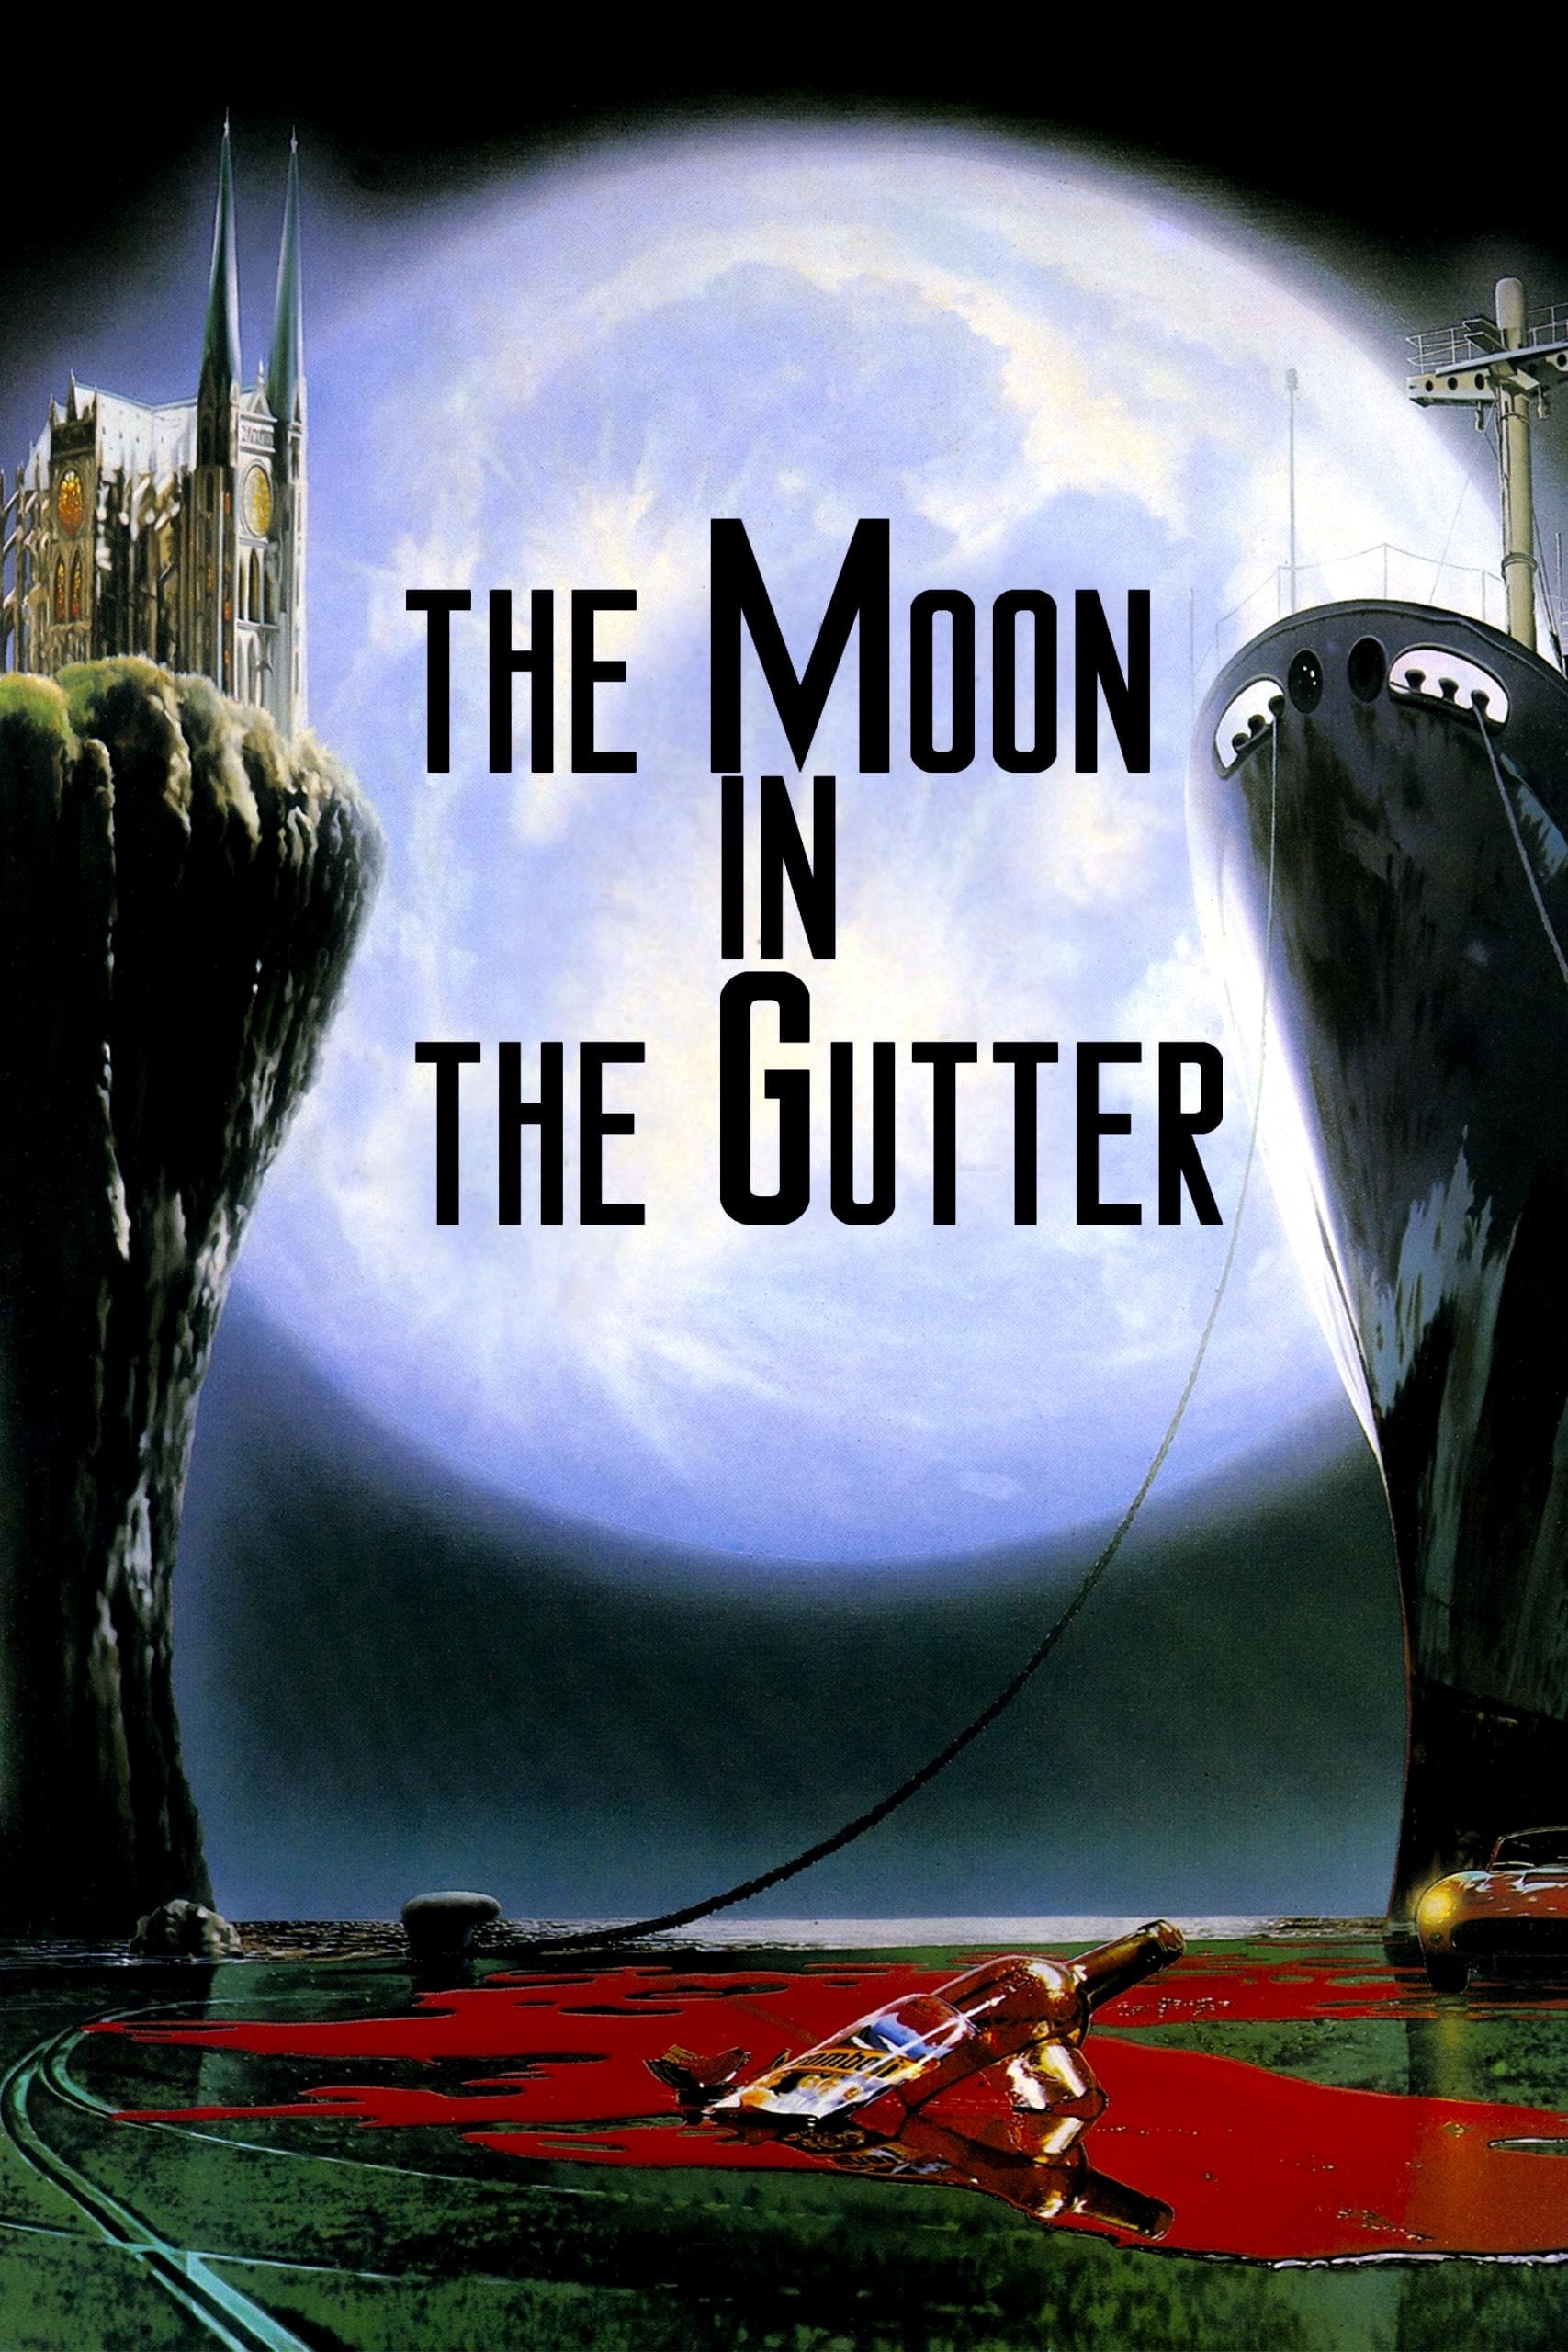 The Moon in the Gutter (1983)